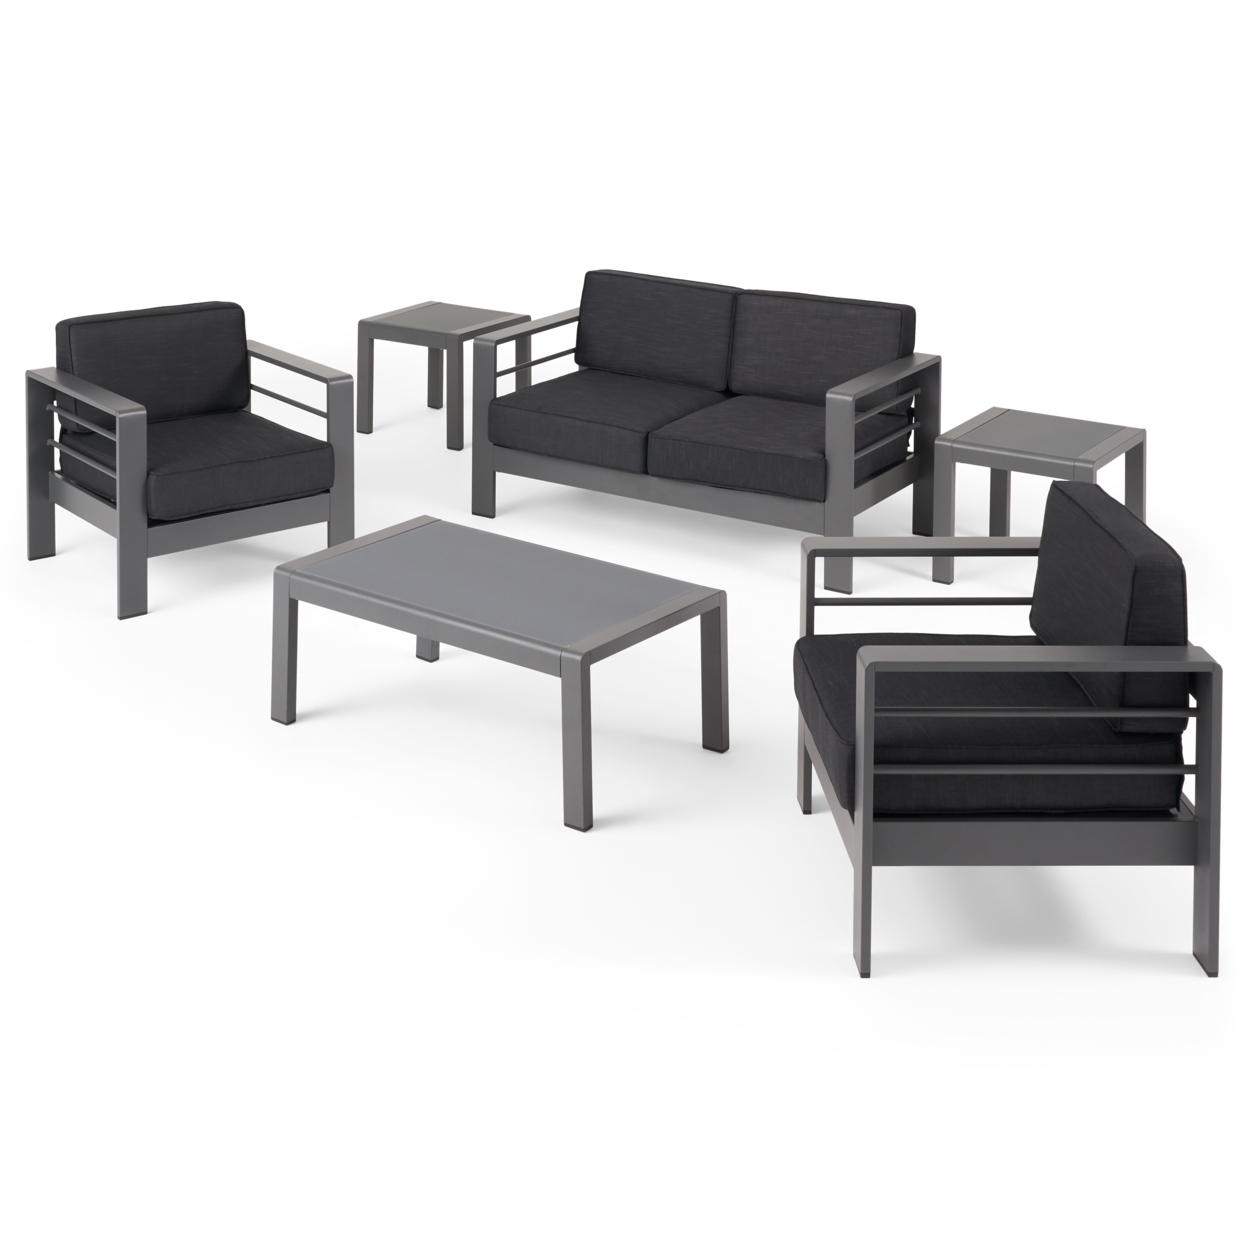 Snowy Coral Outdoor 4 Seater Aluminum Chat Set With 2 Side Table - Gray, Dark Gray